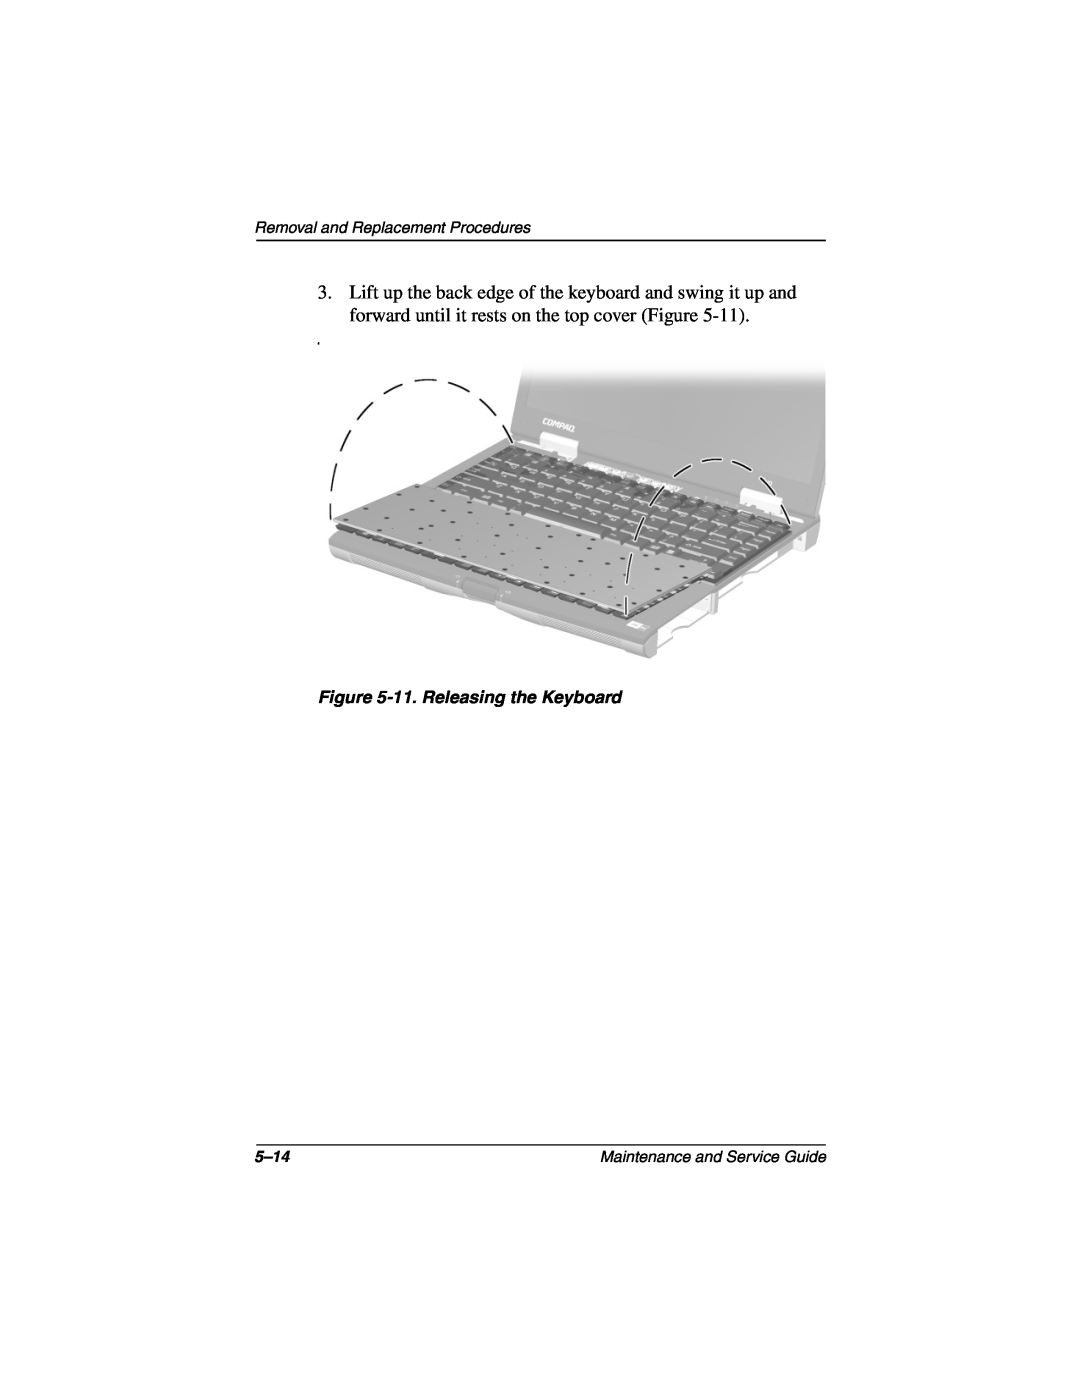 Compaq N160 manual 11. Releasing the Keyboard, Removal and Replacement Procedures, 5-14, Maintenance and Service Guide 